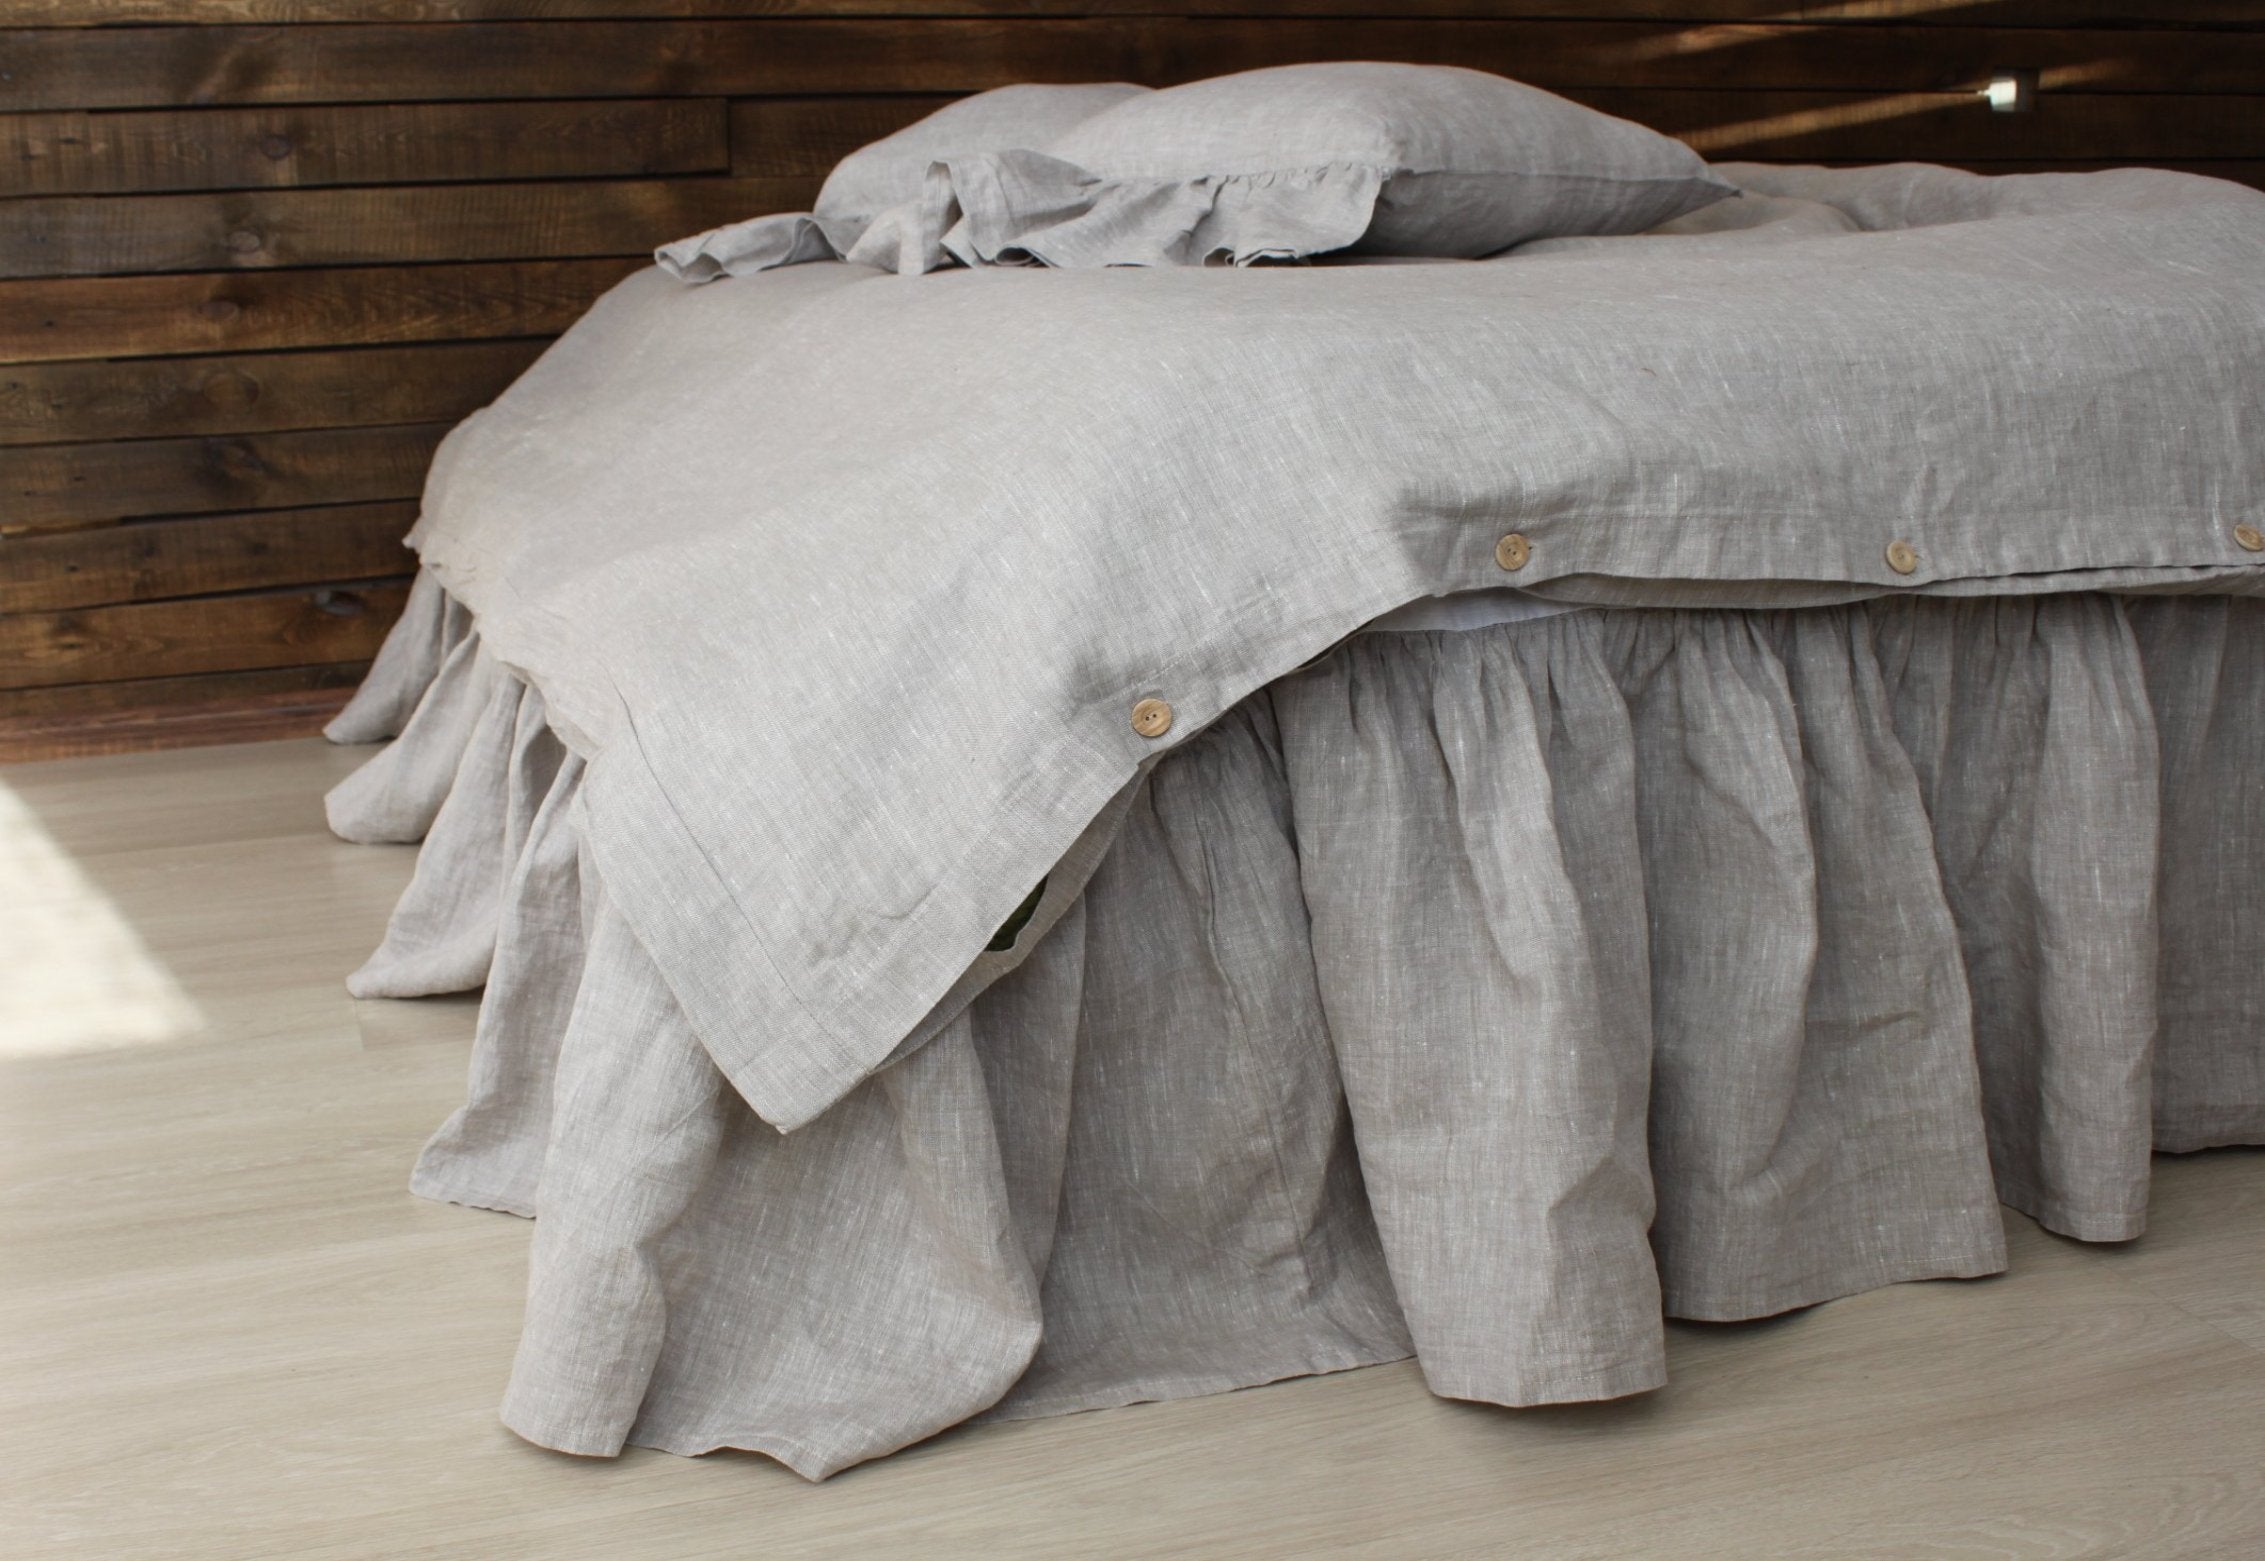 Linen Bed Valance Sheet with Gathered Ruffles and Cotton Decking - in